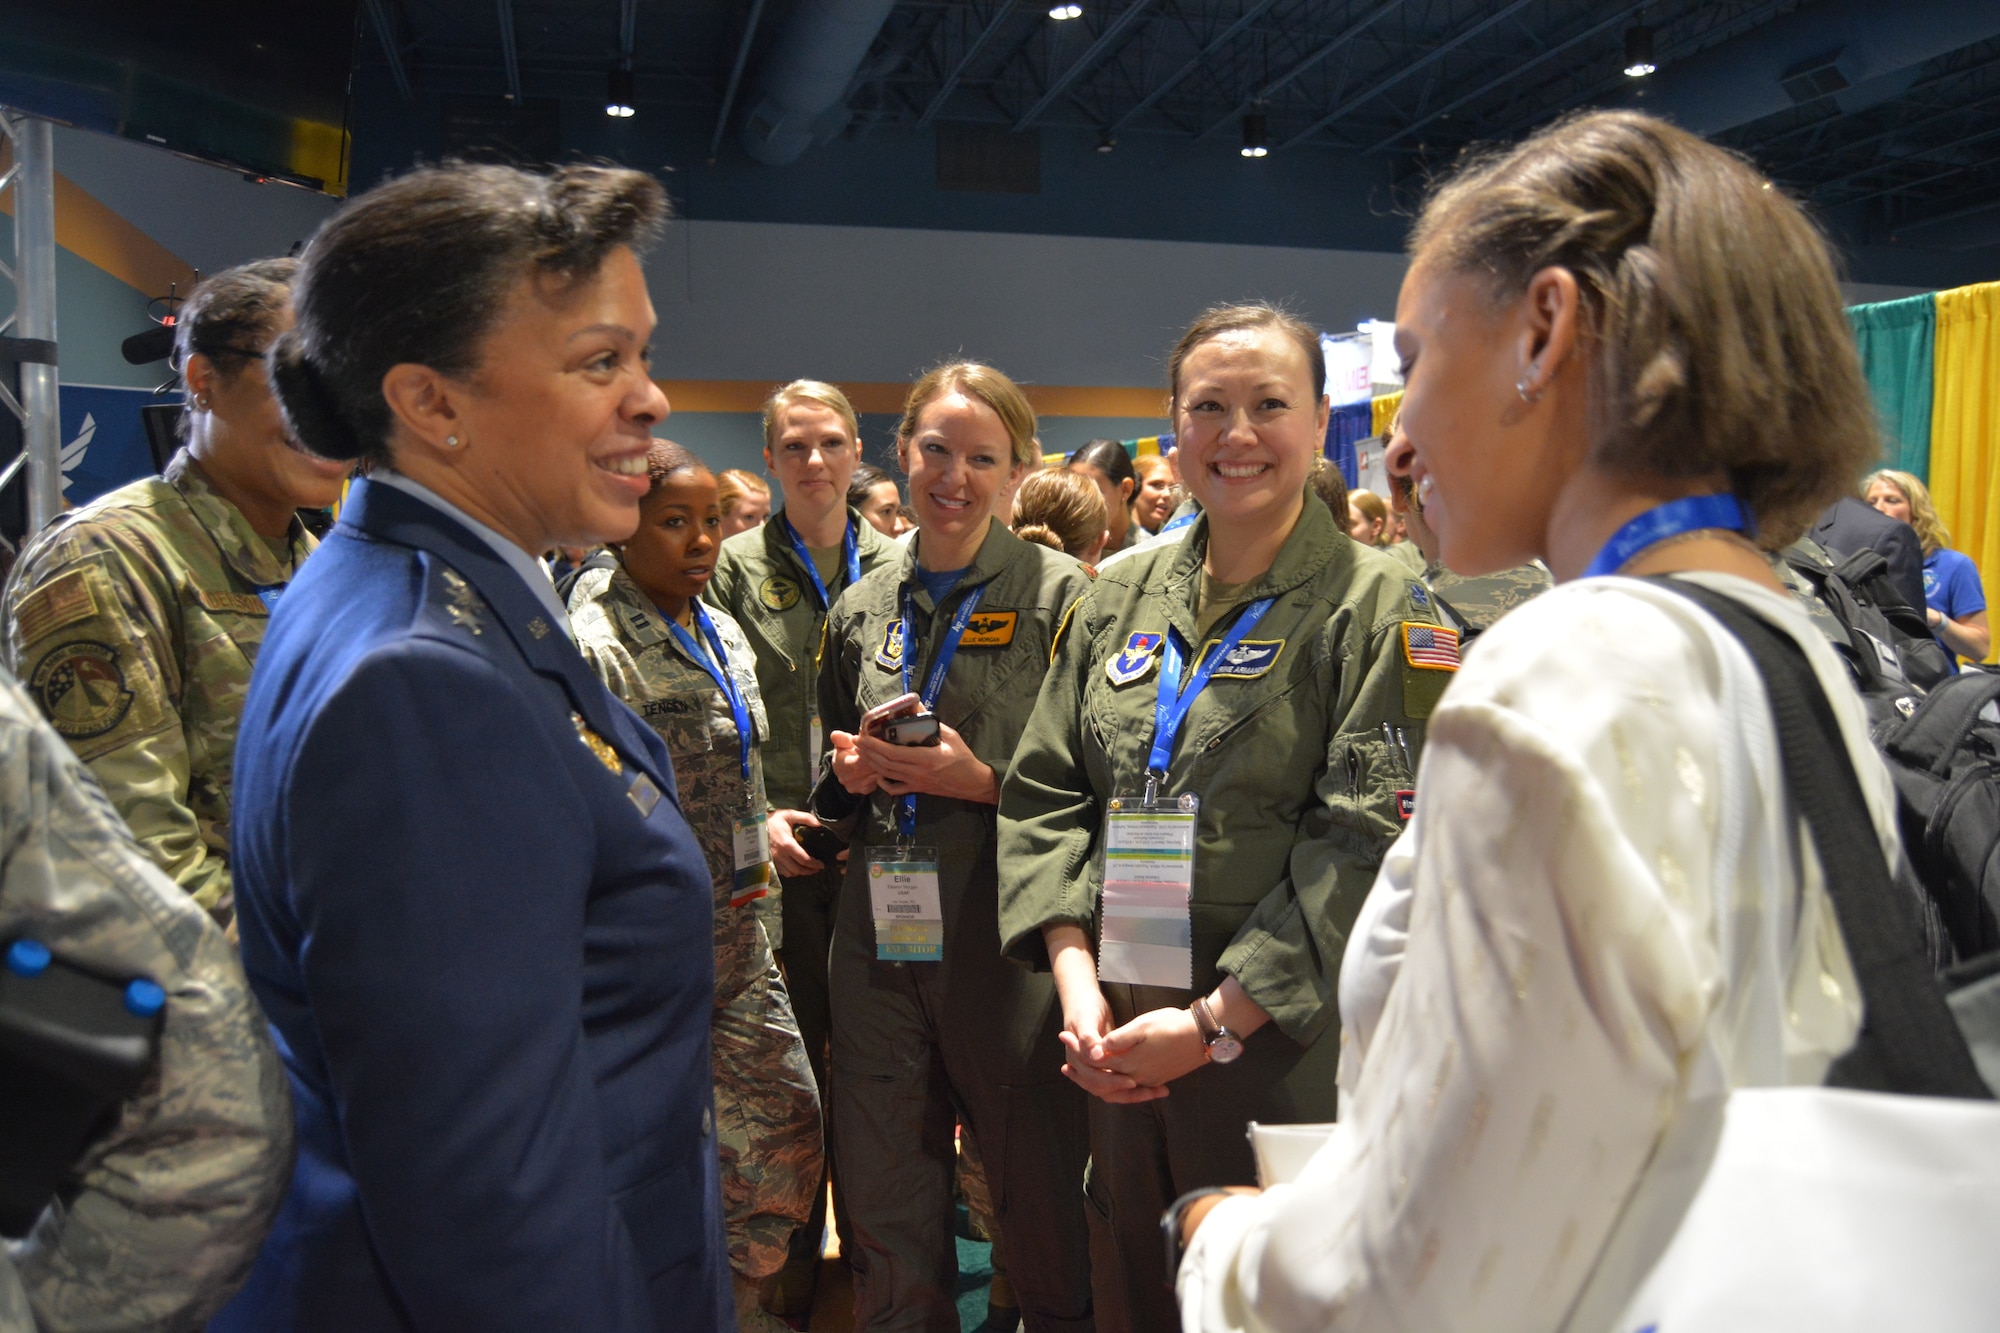 Air Force inspires attendees at Women in Aviation International’s 31st conference with multiple speakers and exhibits